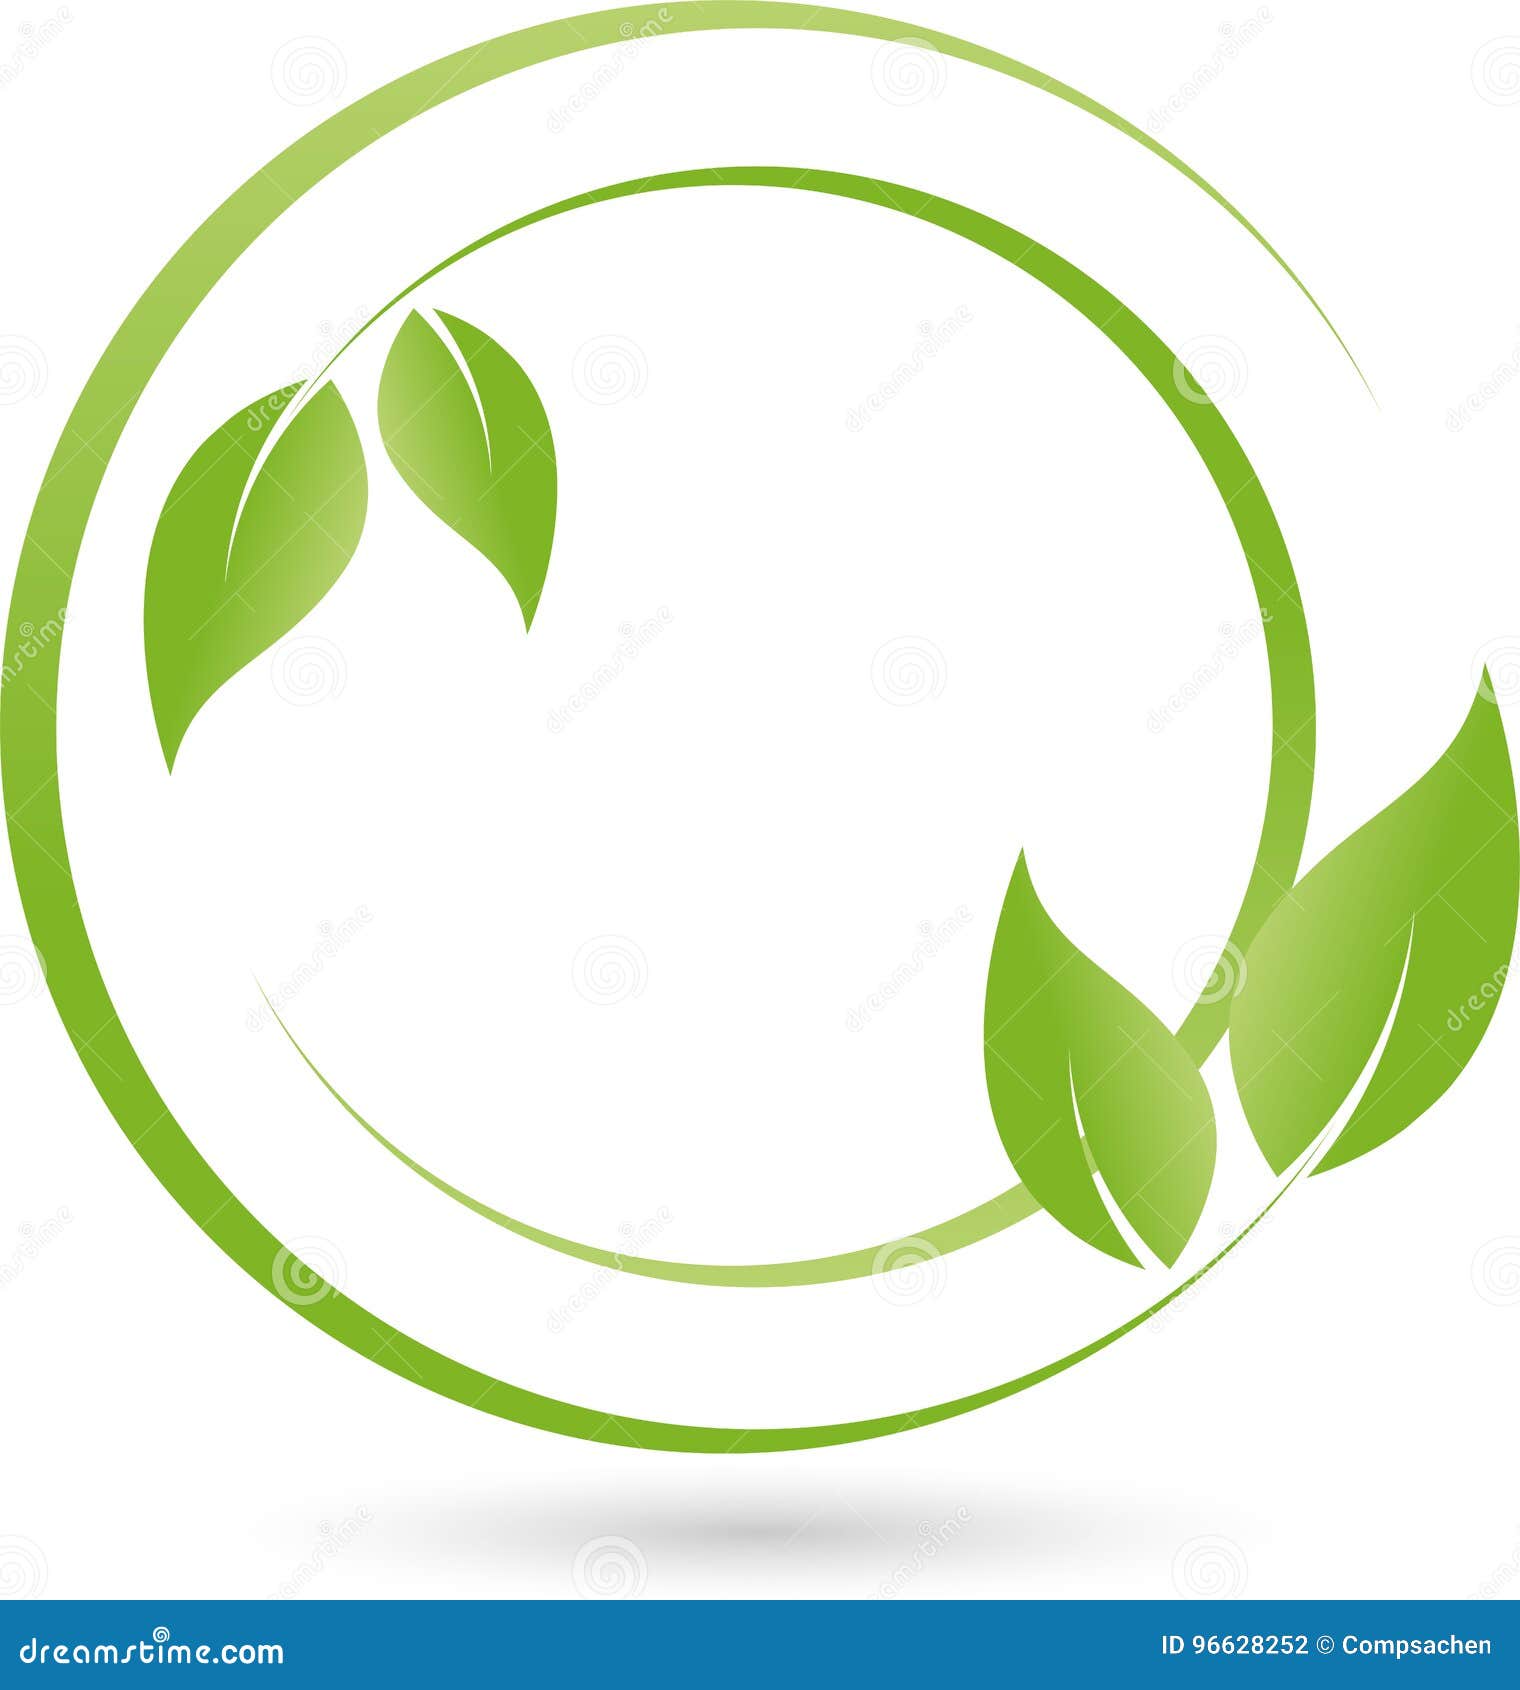 two plants, leaves, wellness and naturopathic logo